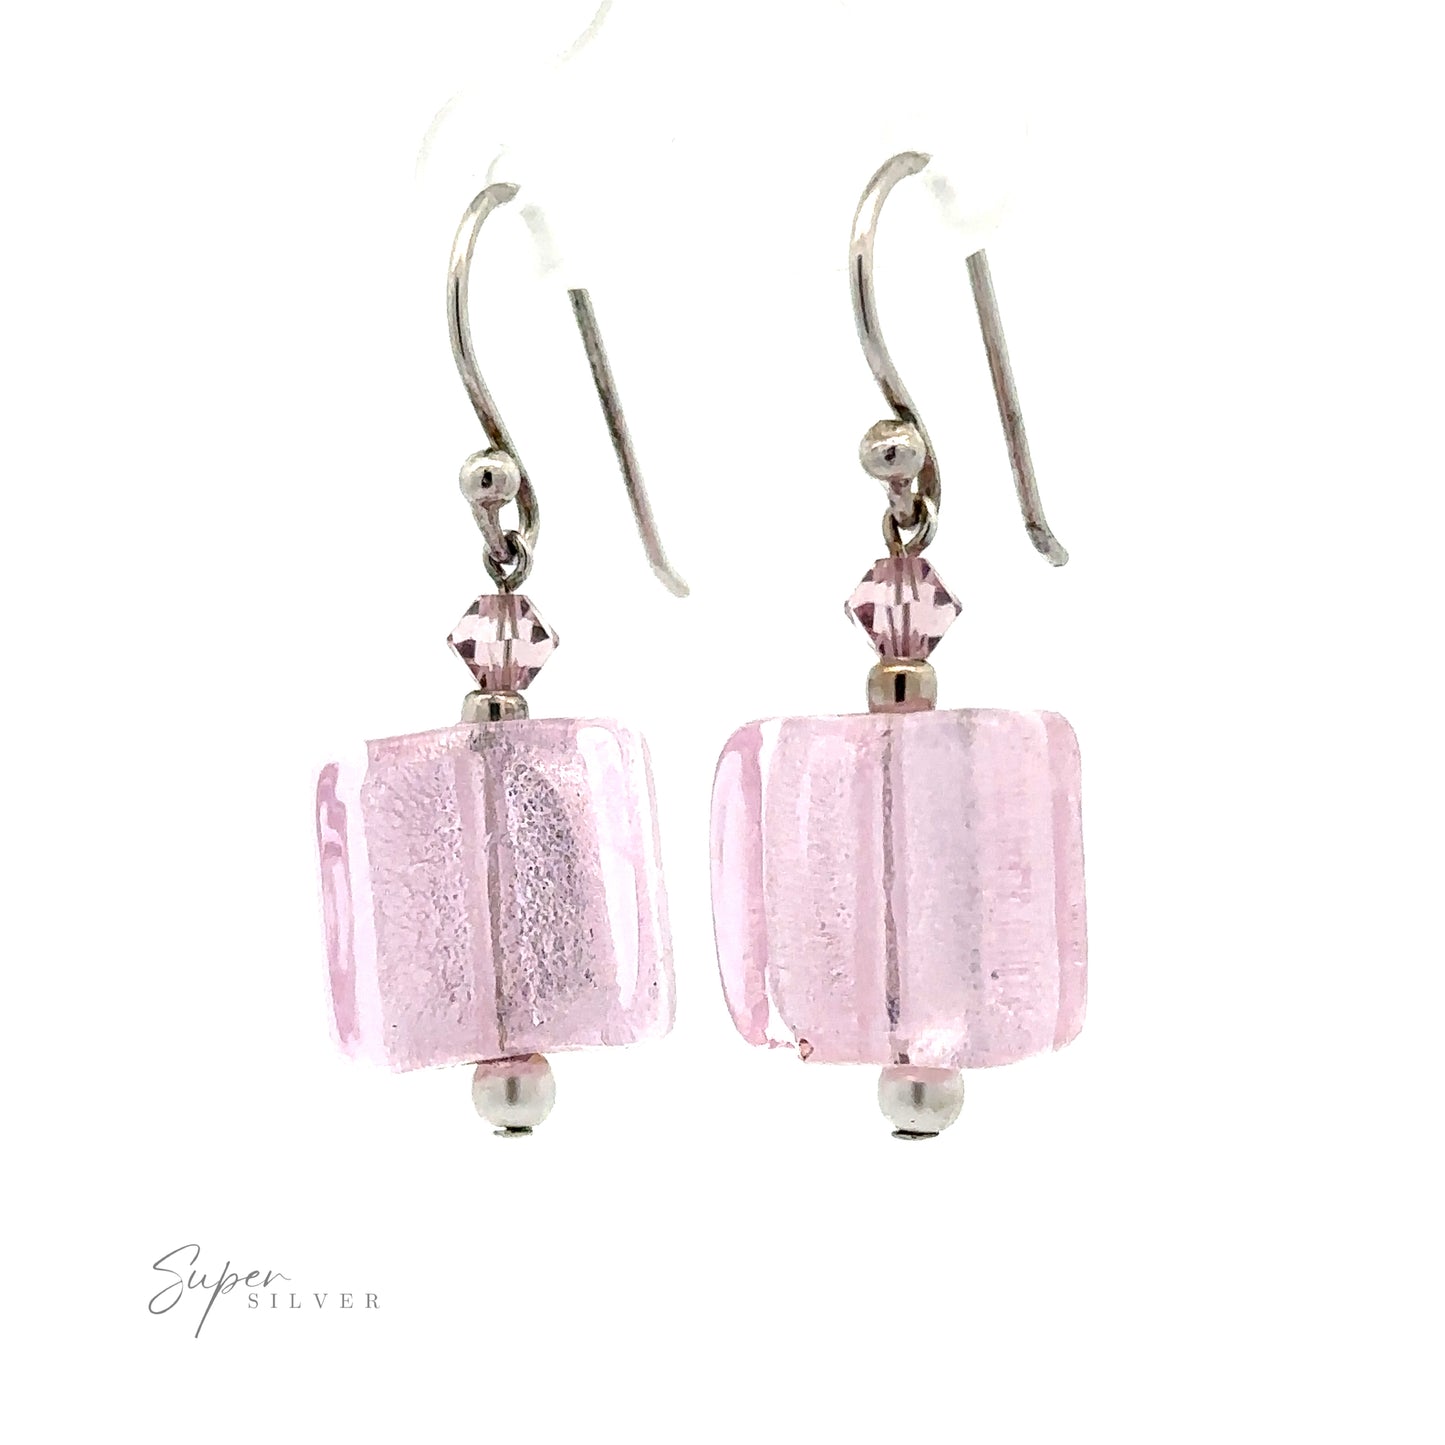 
                  
                    A pair of Beaded Resin Earrings with Small Pearls with pink, translucent square beads and small pink crystals, showcased against a white background. Accented with synthetic pearls for a touch of elegance. Text "Super Silver" is visible in the bottom left corner.
                  
                